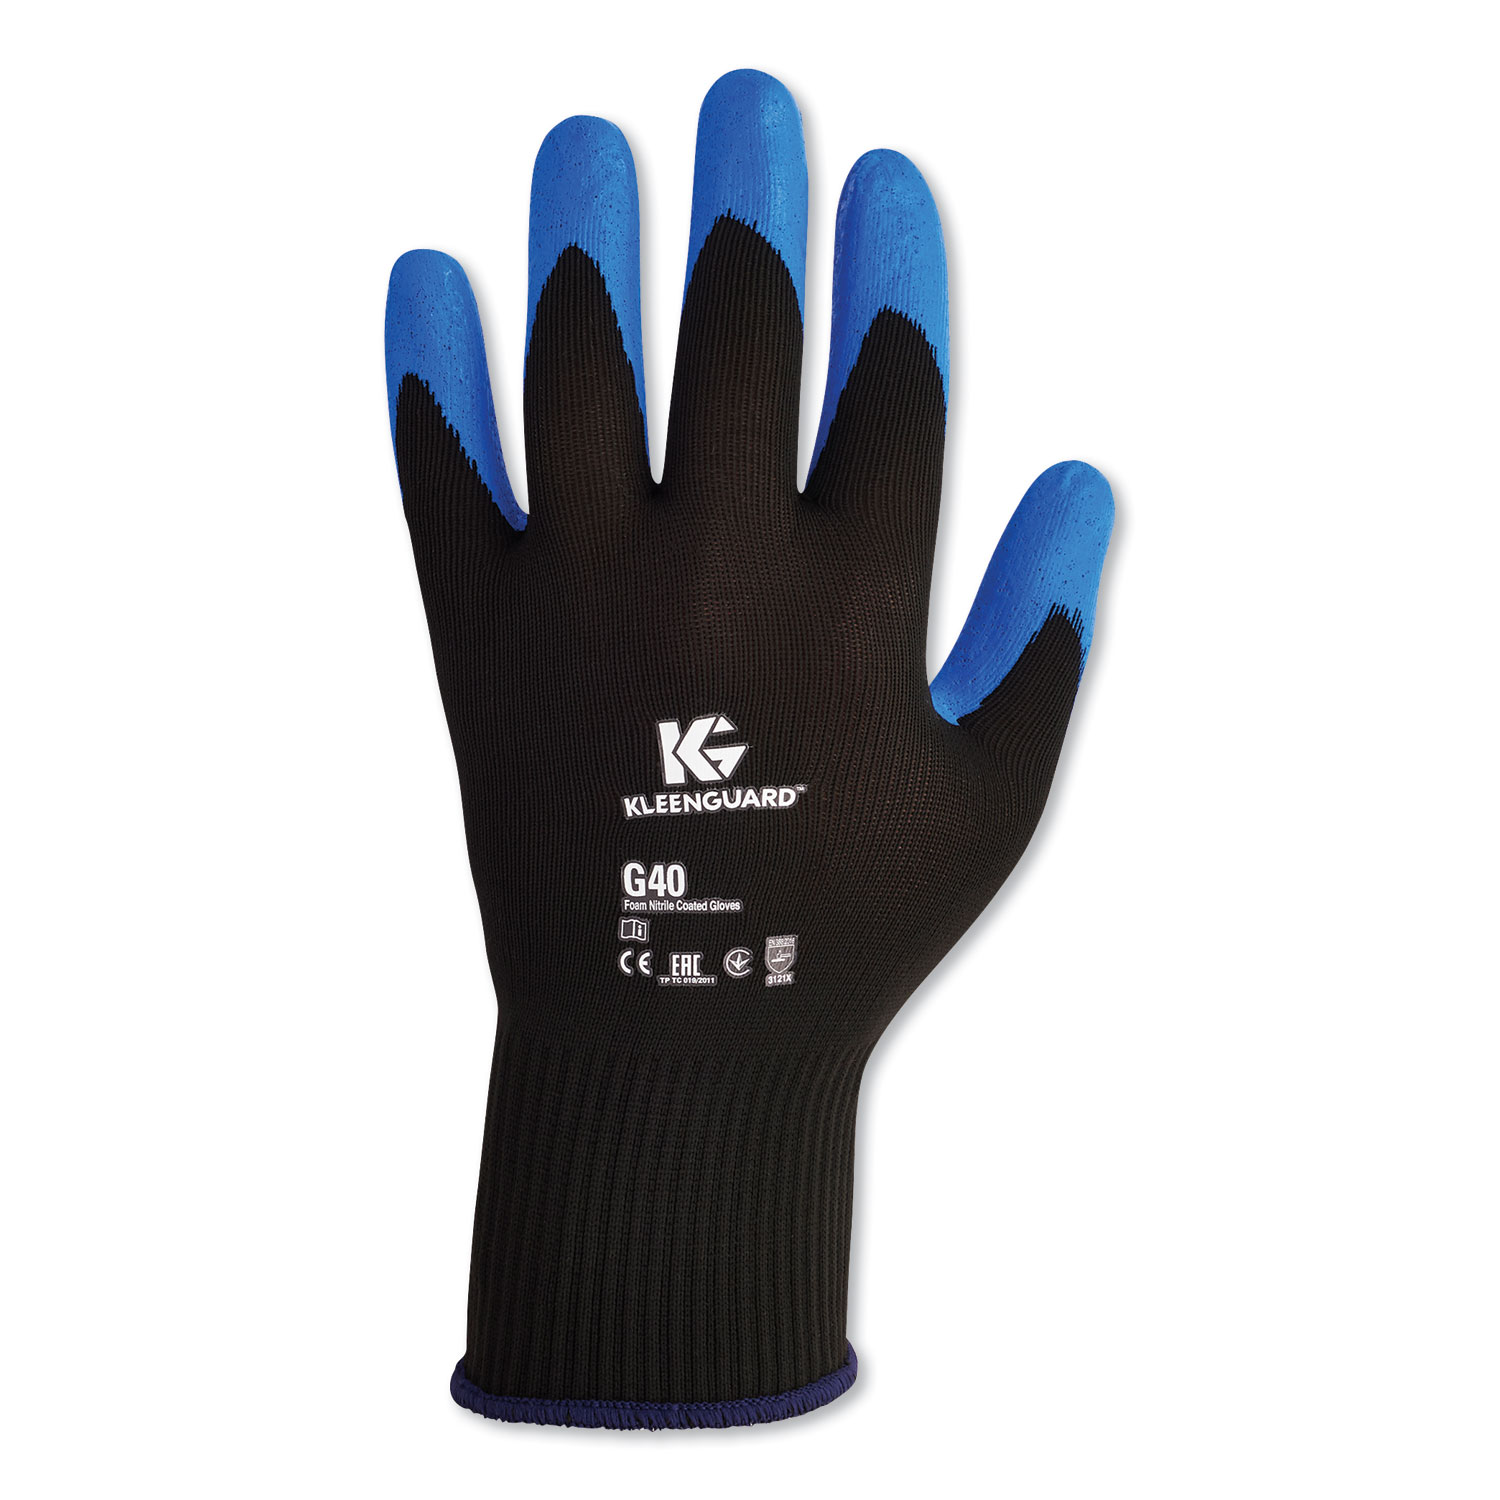  KleenGuard 40225 G40 Nitrile Coated Gloves, 220 mm Length, Small/Size 7, Blue, 12 Pairs (KCC40225) 